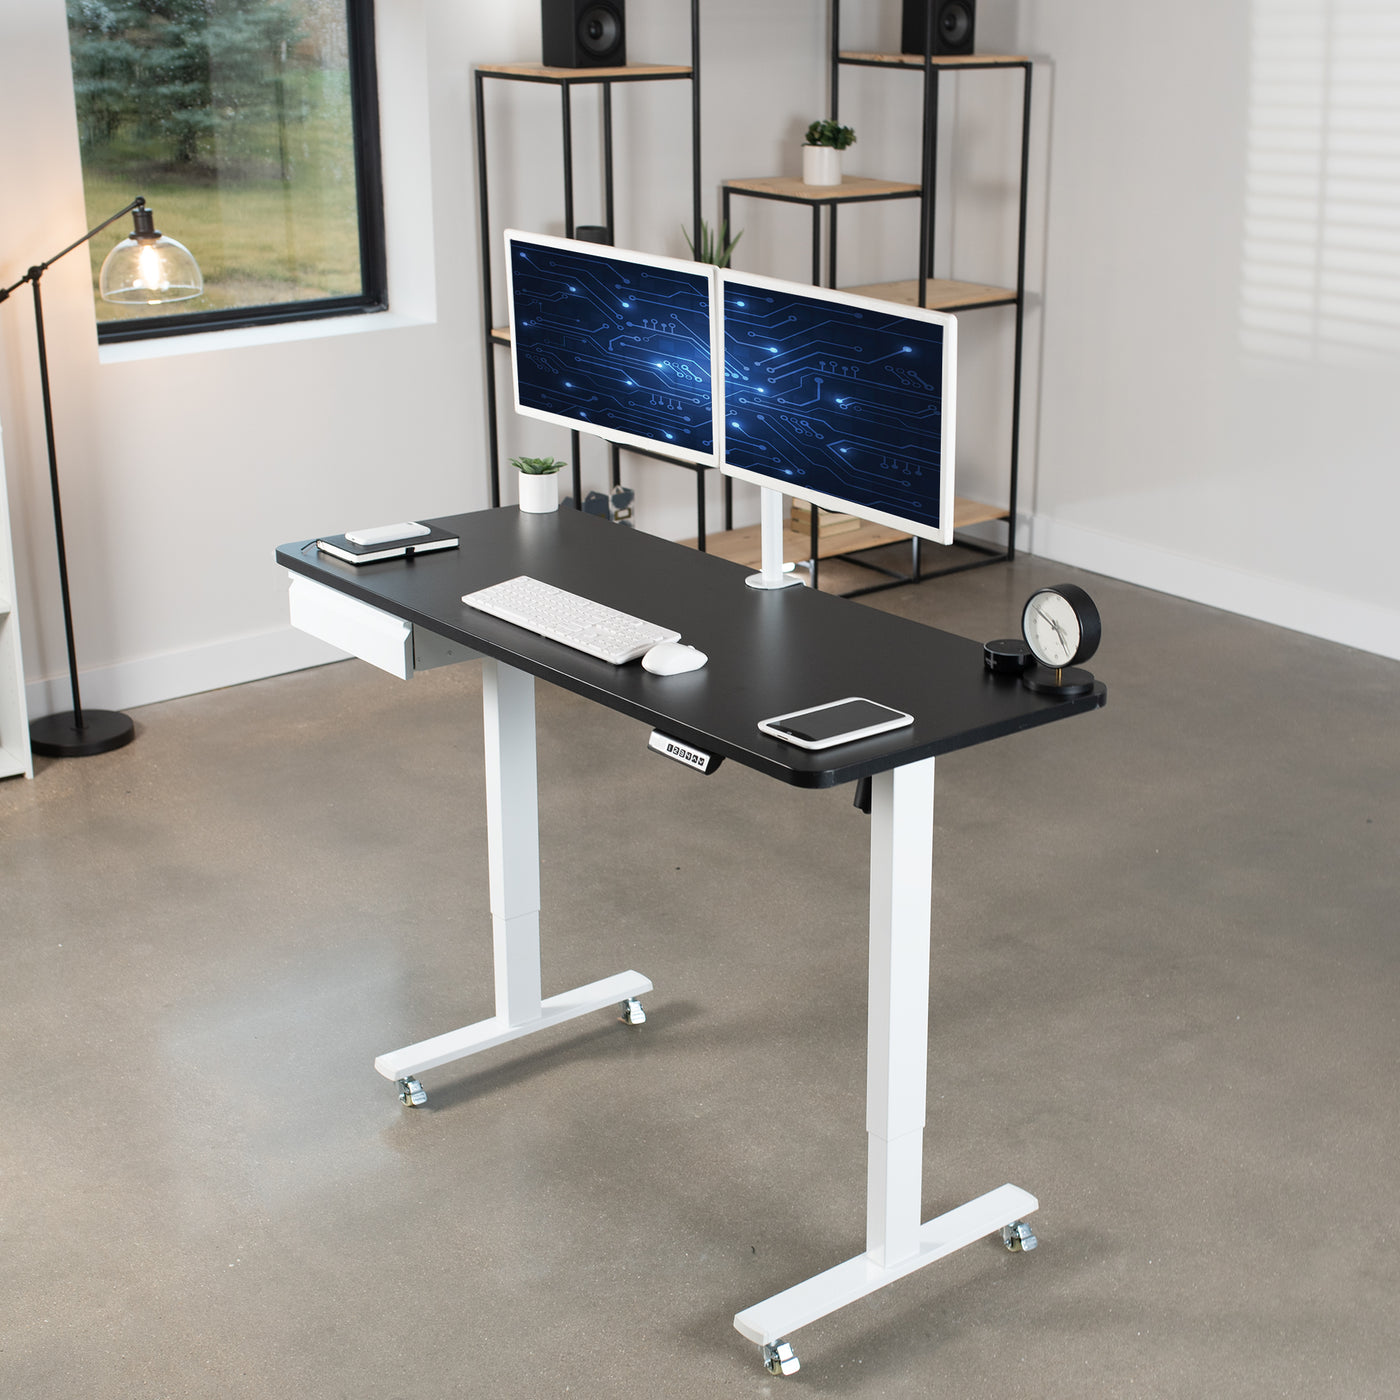 60" x 24" Electric Desk with Drawer Accessory Kit